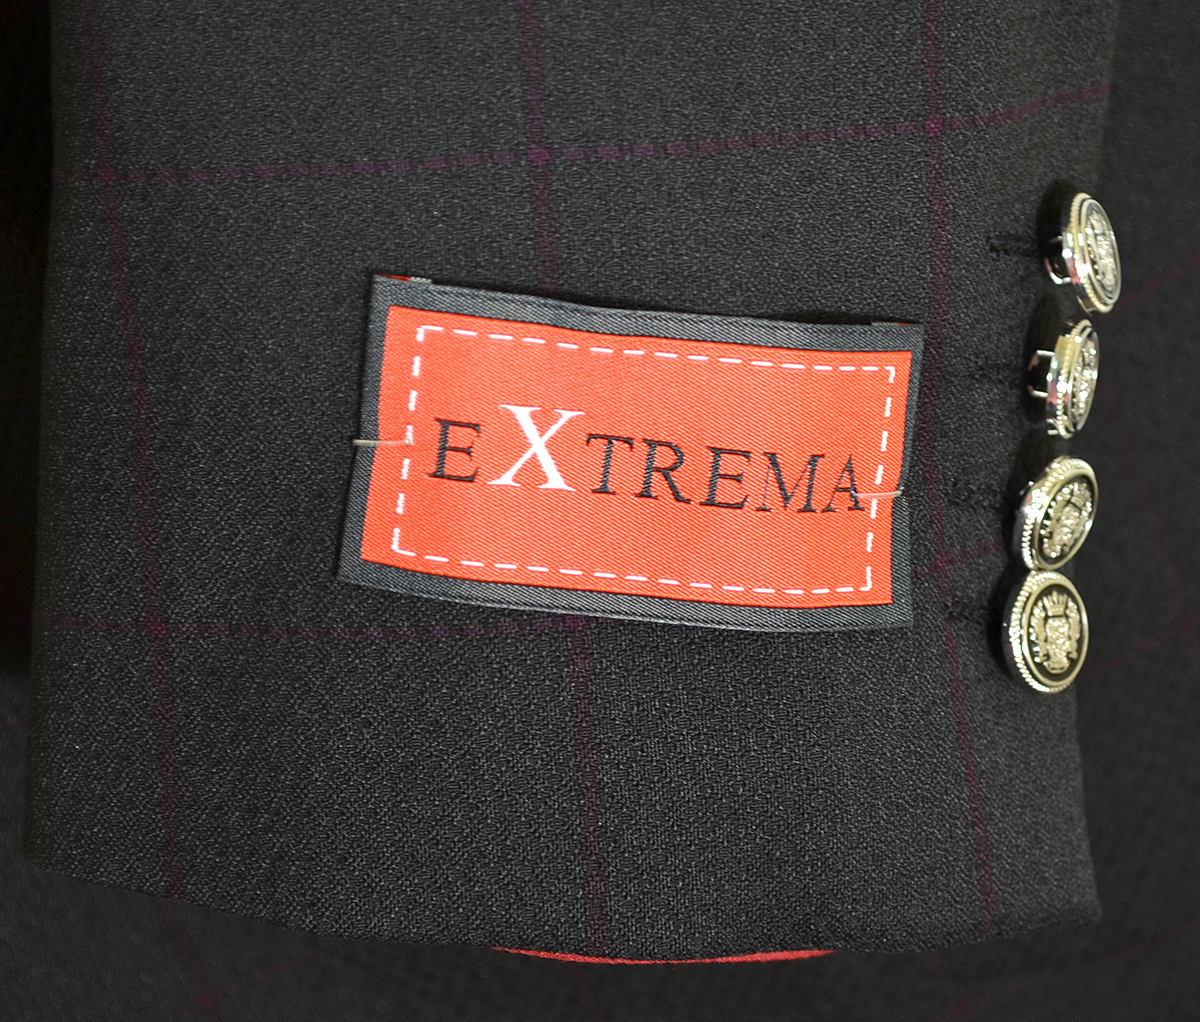 extrema logo on a black suit